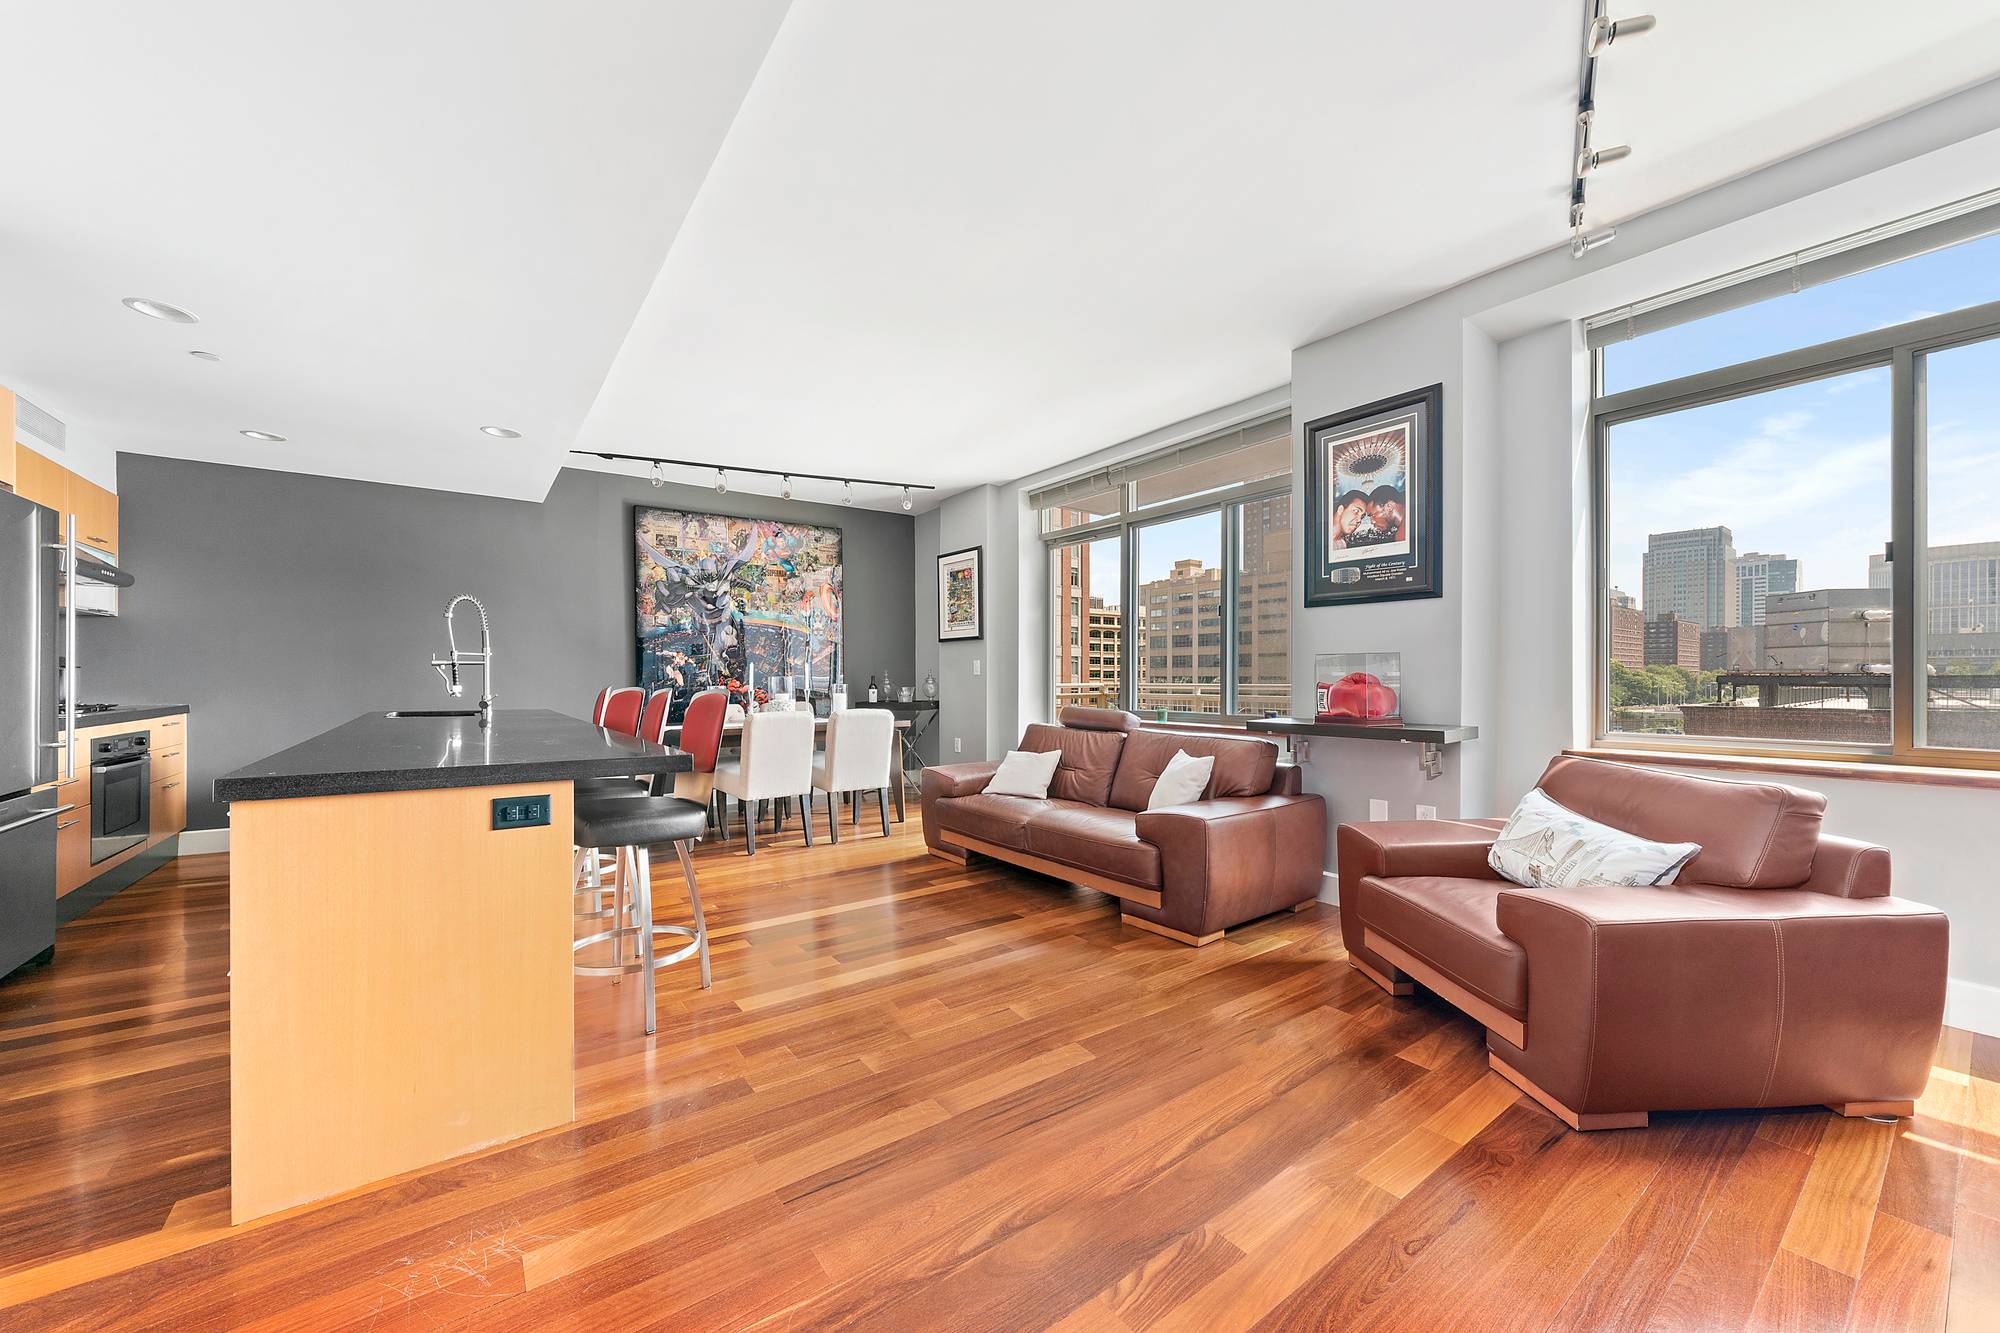 NO FEE ! This sleek, modern and quiet 2 bedroom, 2 bath apartment is located at The Nexus, a boutique, luxury condominium in the heart of DUMBO.